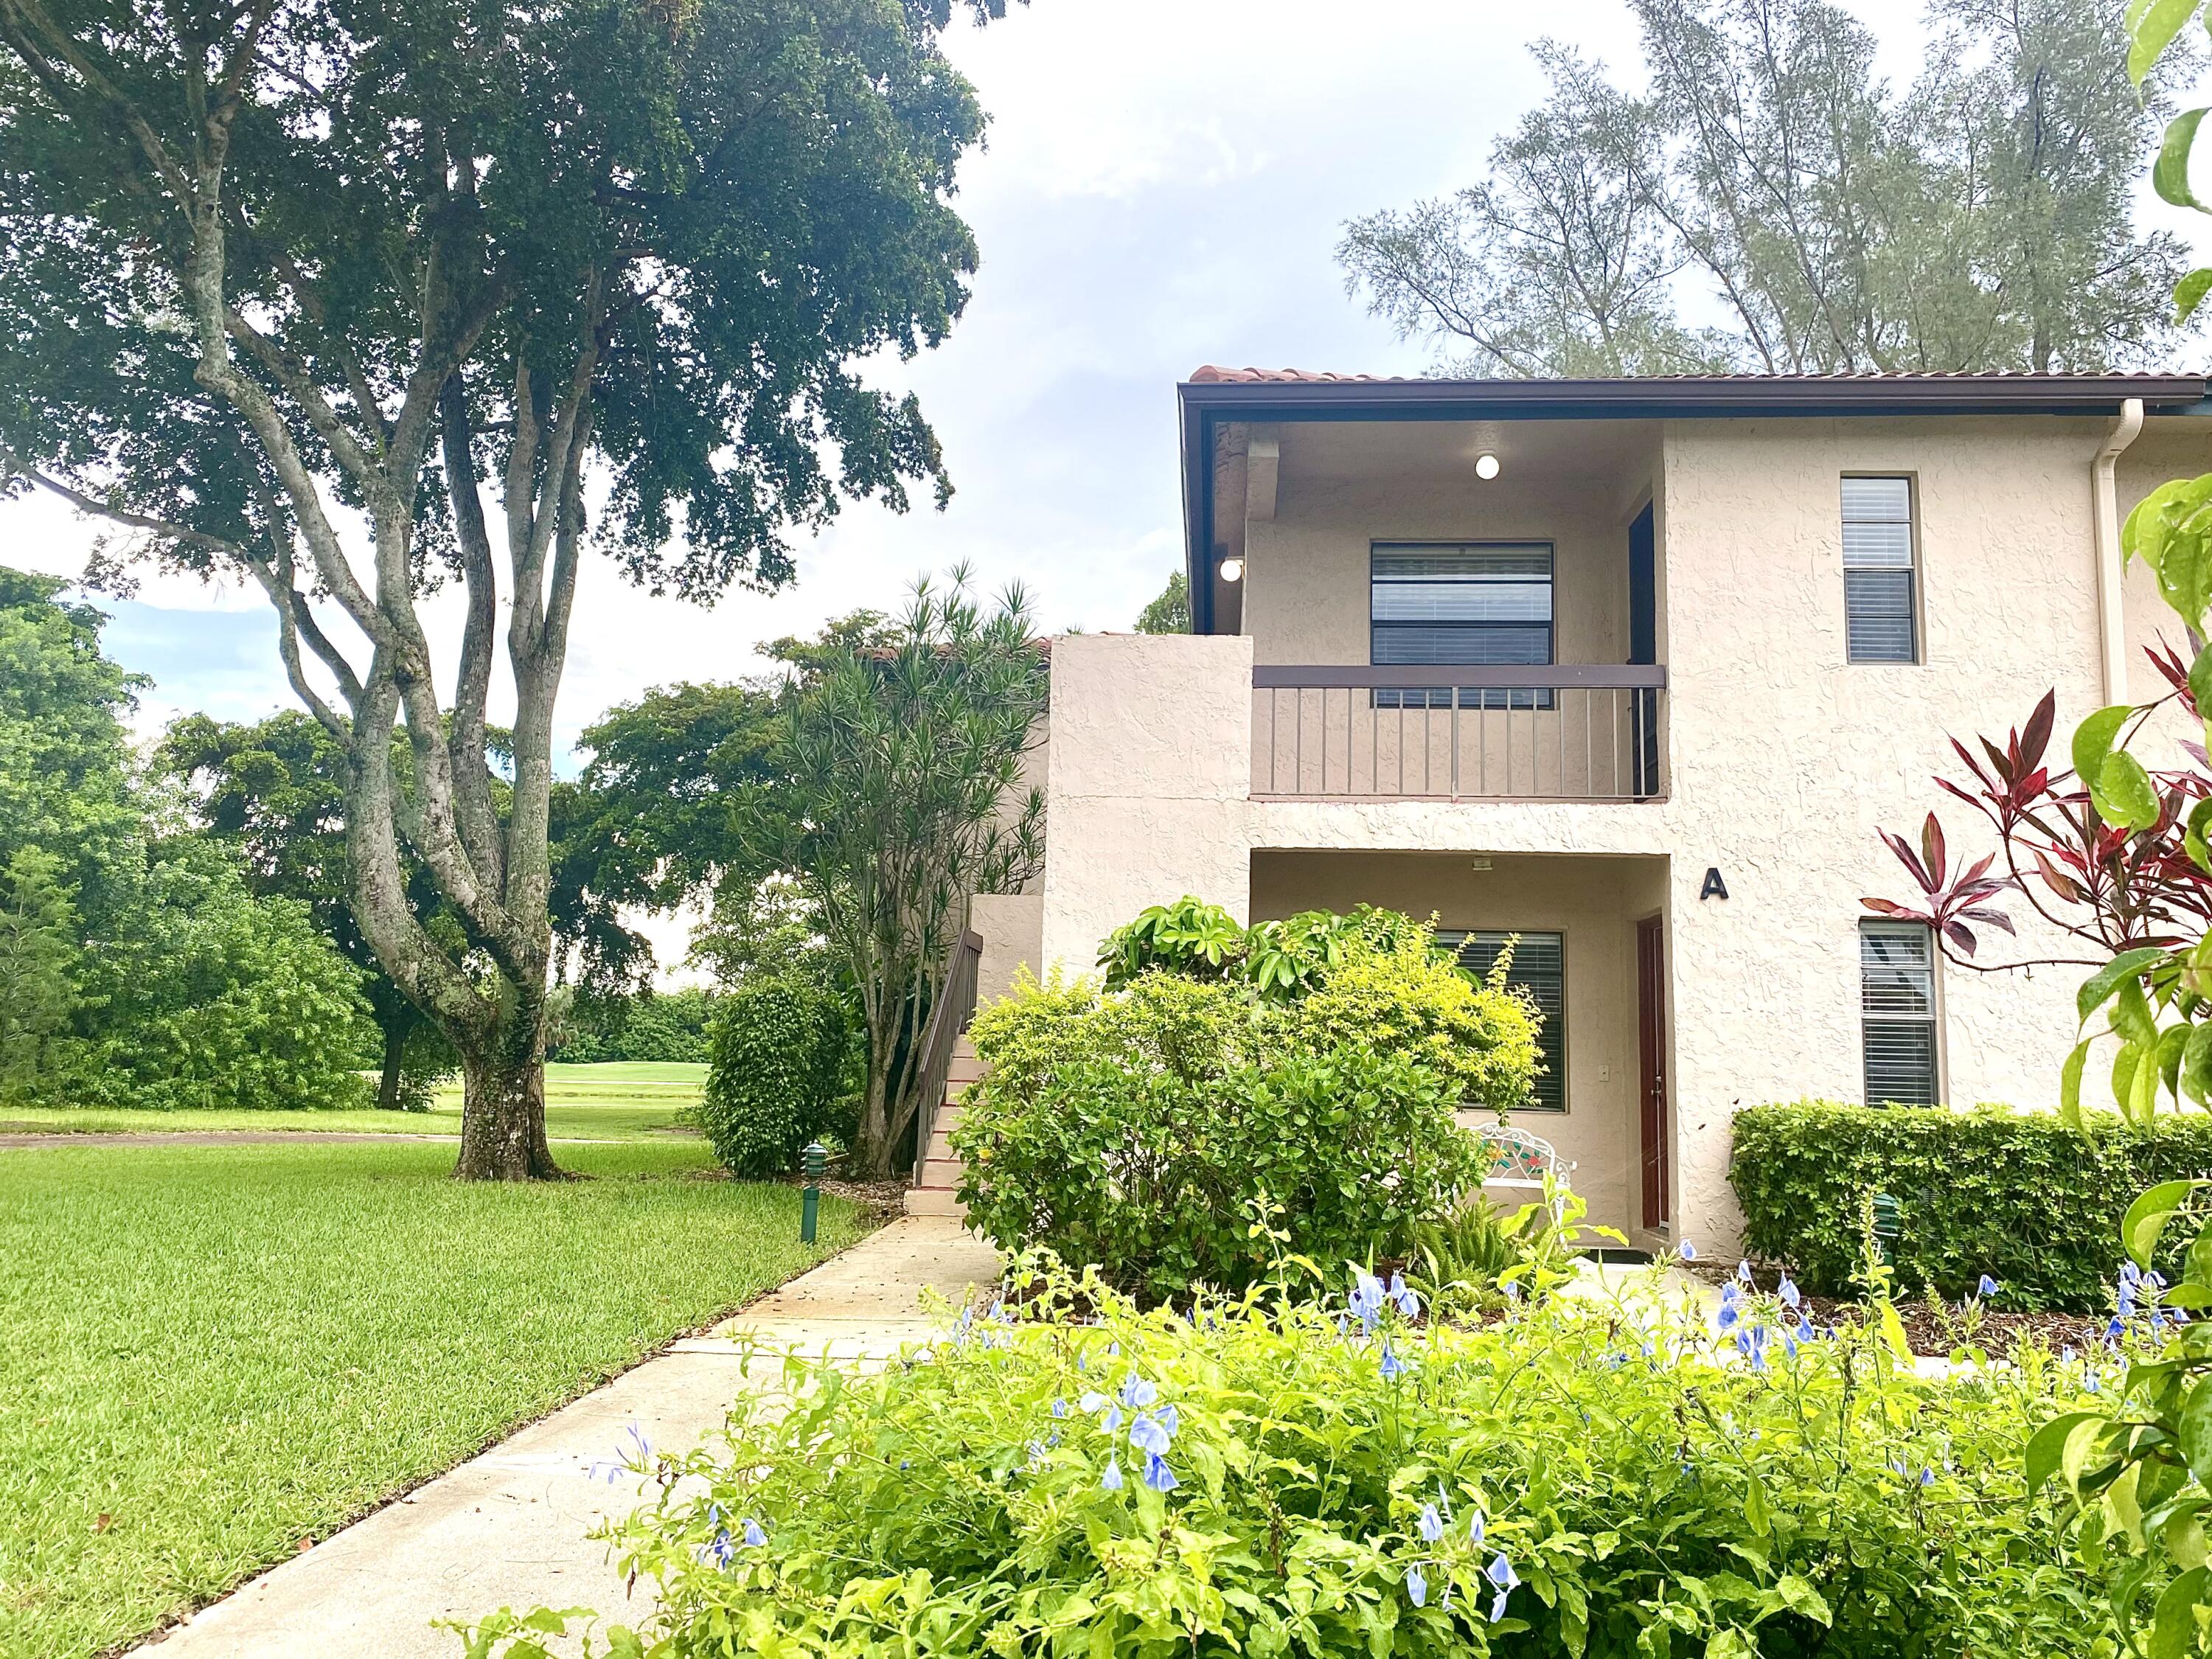 One of the most desired, gated 55+ communities Boca Raton has to offer! Larger, corner unit with astonishing tree lined, golf course views captured from the closed-in balcony, living room and 3rd Bedroom/Den/Office. Quiet and private location in community. Entire condo newly repainted. Newer kitchen appliances. HOA includes manned gate, management on site, community pools, clubhouse, basic cable and WiFi. Country Club membership available but not mandatory.  Great location close to highways, shops and several restaurants.